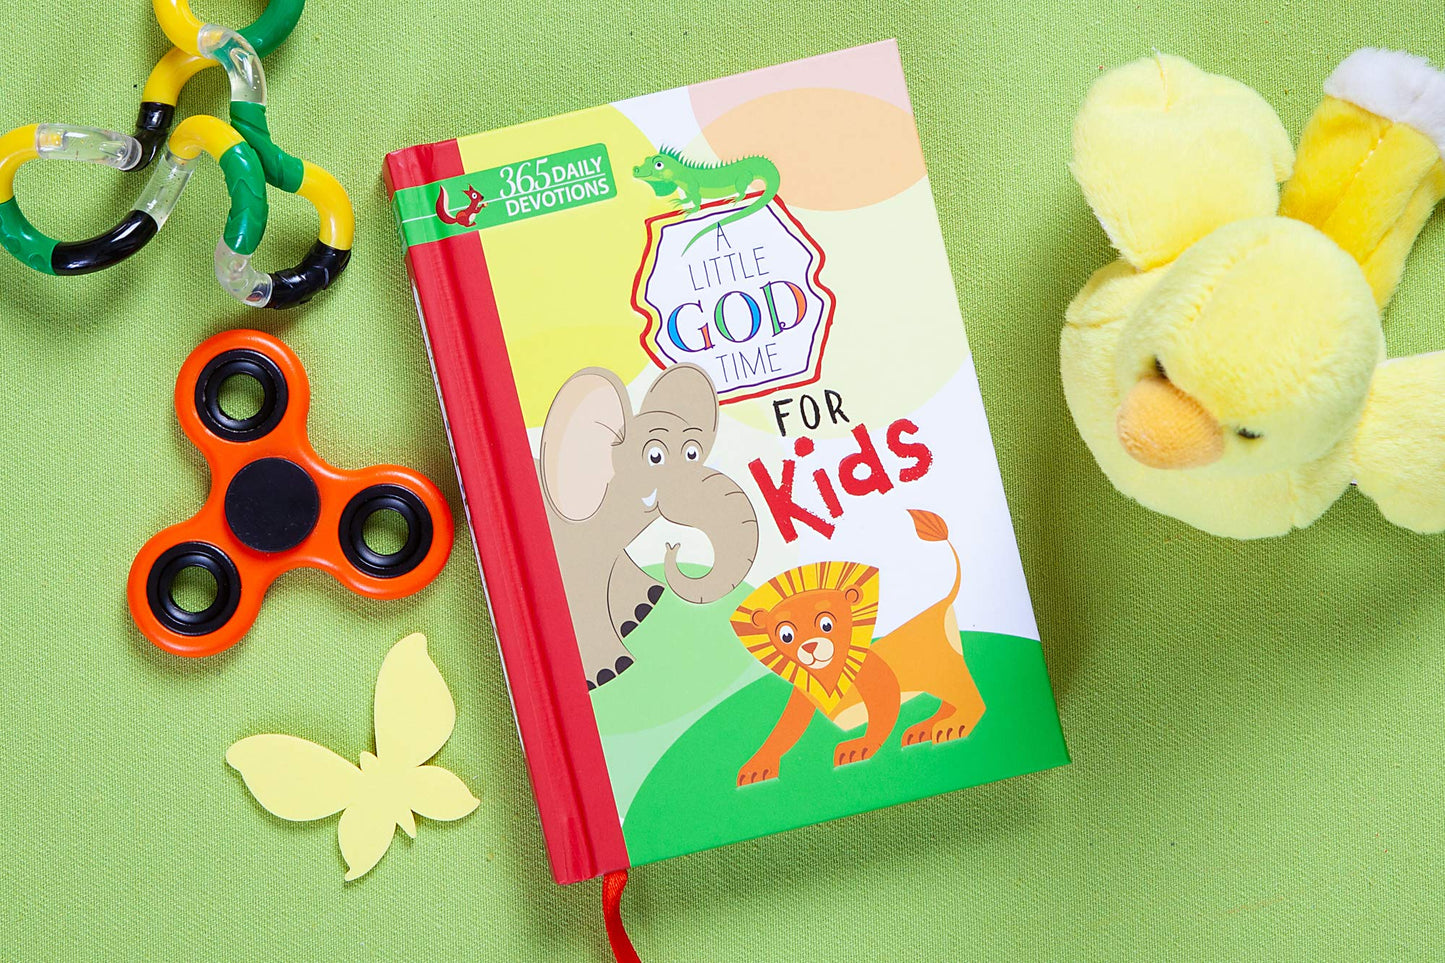 A Little God Time for Kids: 365 Daily Devotions (Hardcover)– Motivational Devotionals for Kids Ages 4-7